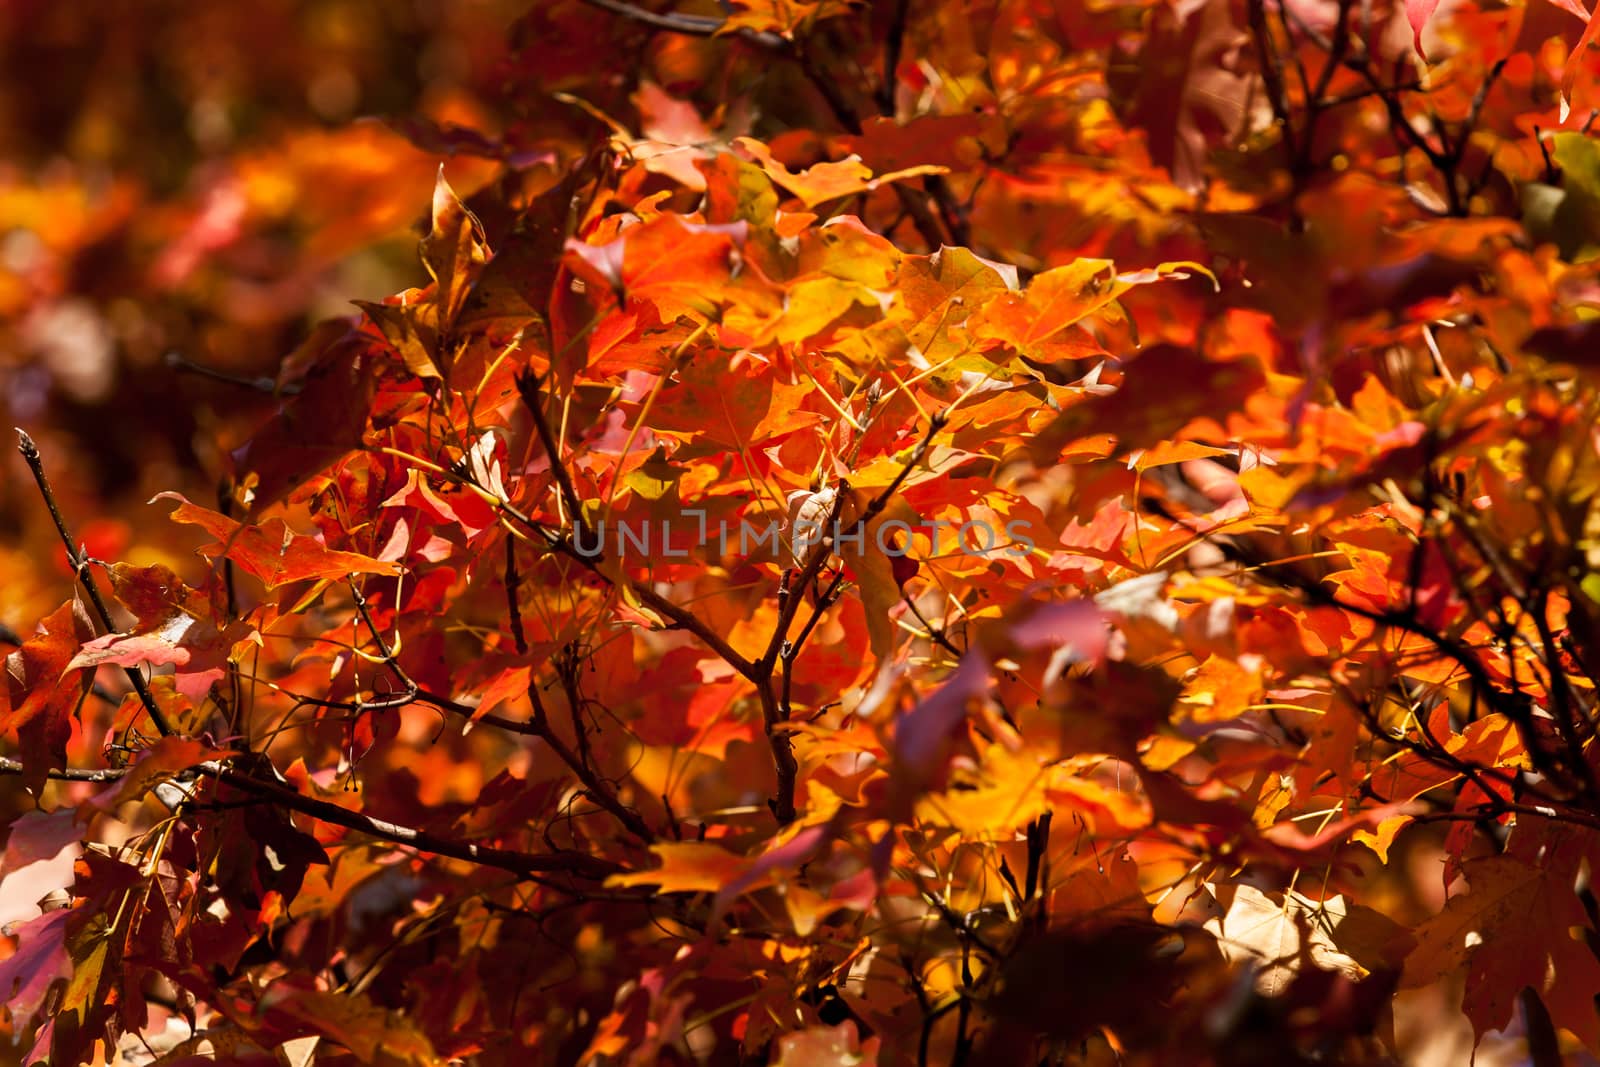 Autumn colors leaves of liquid amber tree selective focus on image center in full frame background.